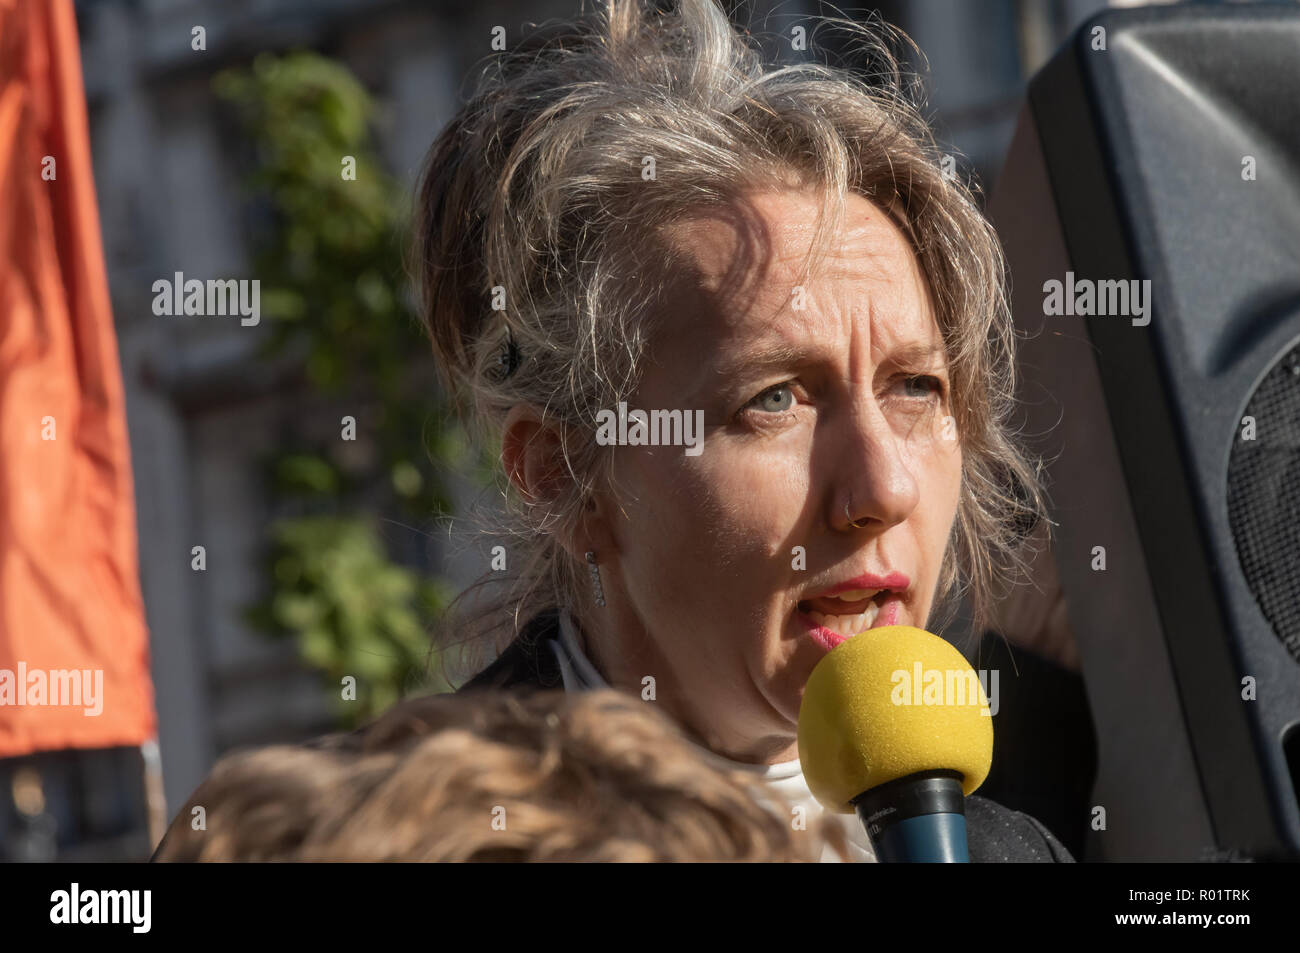 London, UK. 31st October 2018. Dr Gail Bradbrook speaks at the Extinction Rebellion protest in Parliament Square. Other speeches were from climate activists including  Swedish schoolgirl Greta Thunberg, campaigner Donnachadh McCarthy, Labour MP Clive Lewis and economist and Green MEP Molly Scott Cato before making a 'Declaration of Rebellion' against the British Government for its criminal inaction in the face of climate change catastrophe and ecological collapse. Credit: Peter Marshall/Alamy Live News Stock Photo